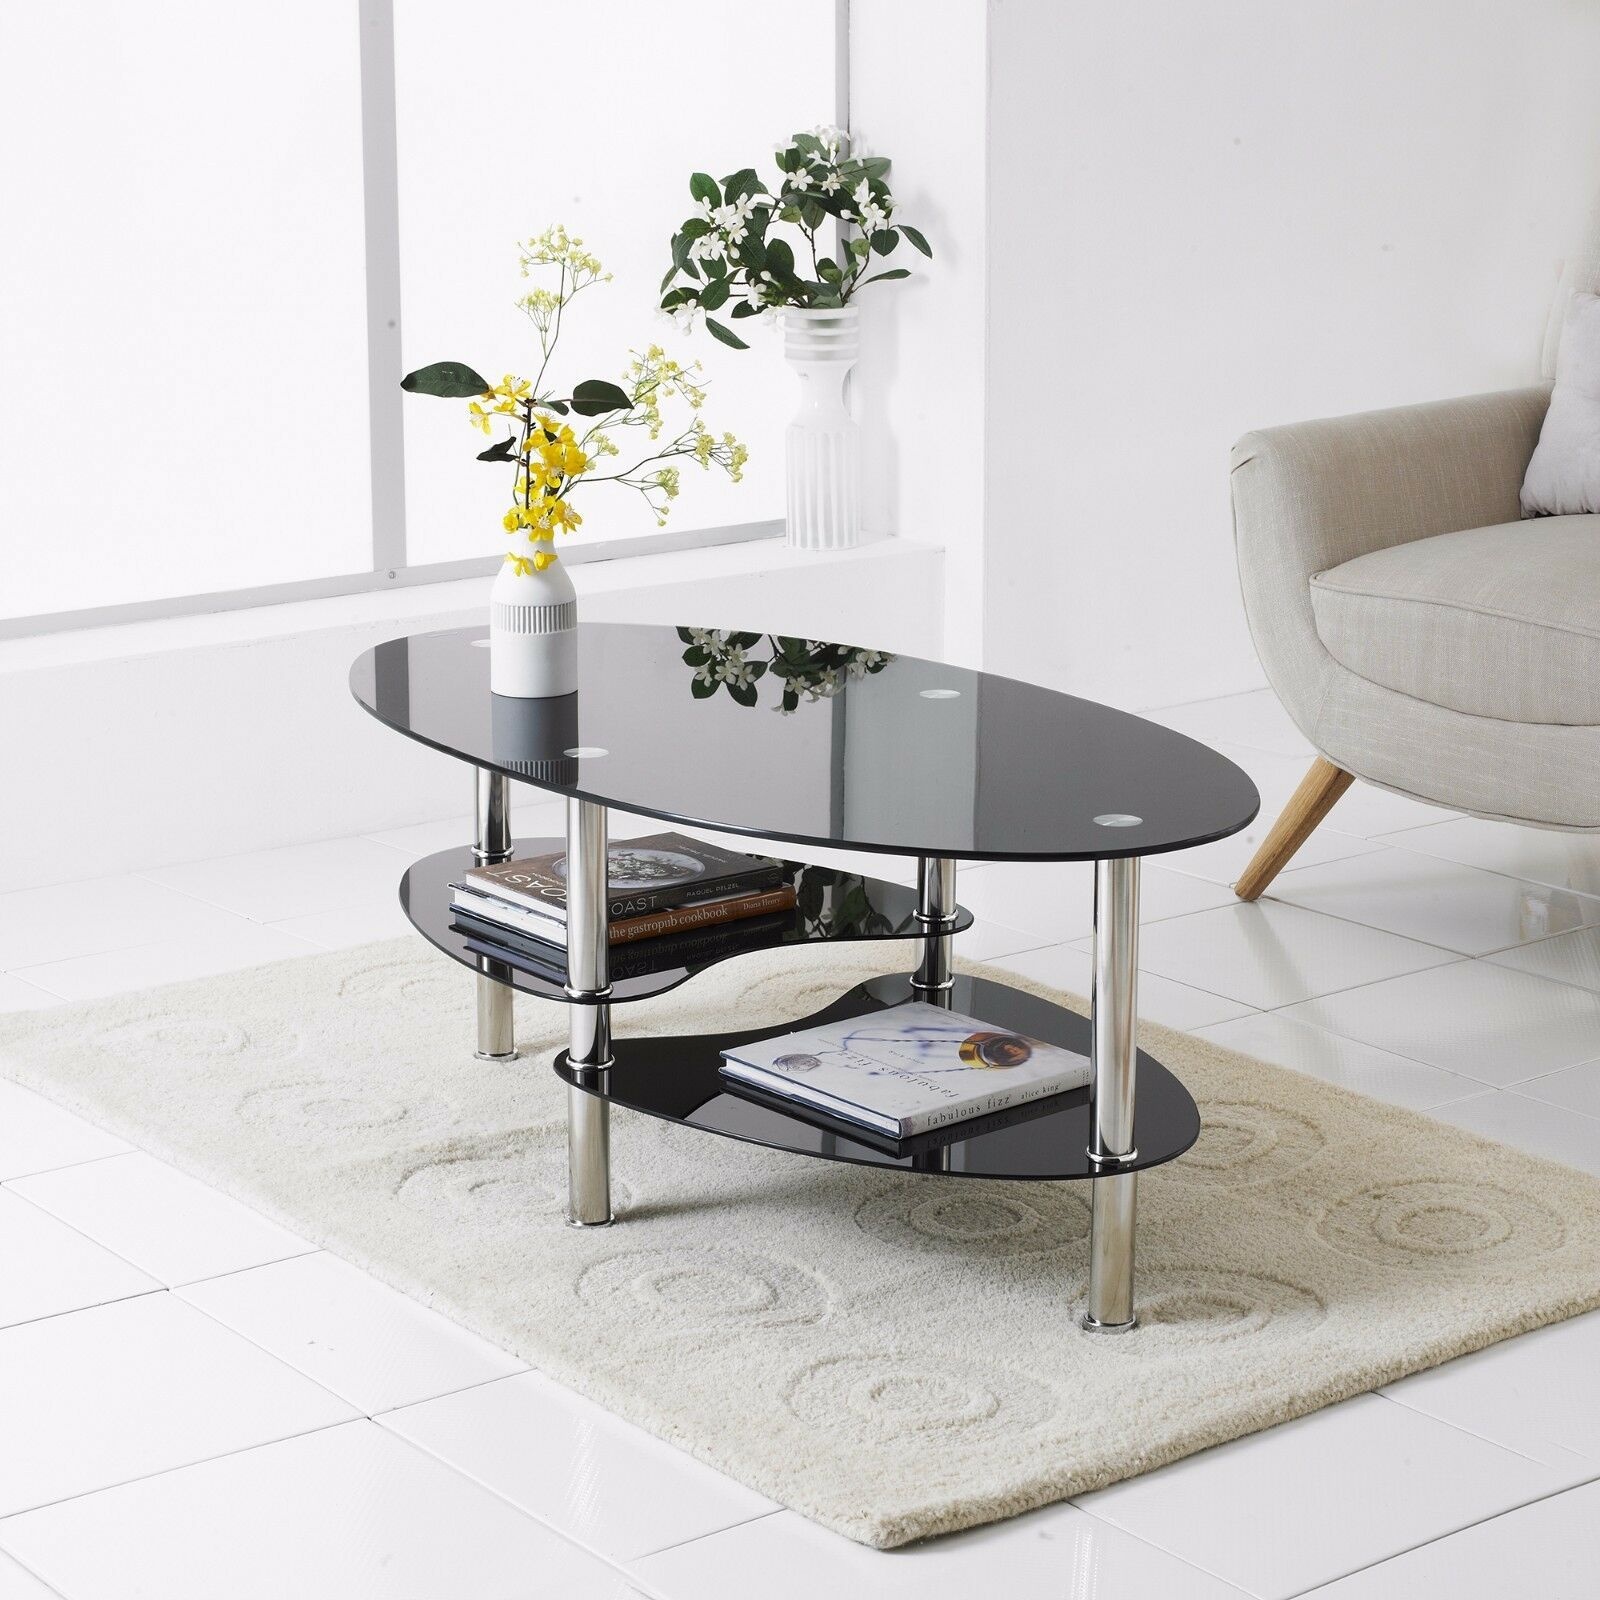 Modern Rectangle Oval Glass & Chrome Living Room Coffee Intended For Rectangular Glass Top Coffee Tables (View 7 of 15)